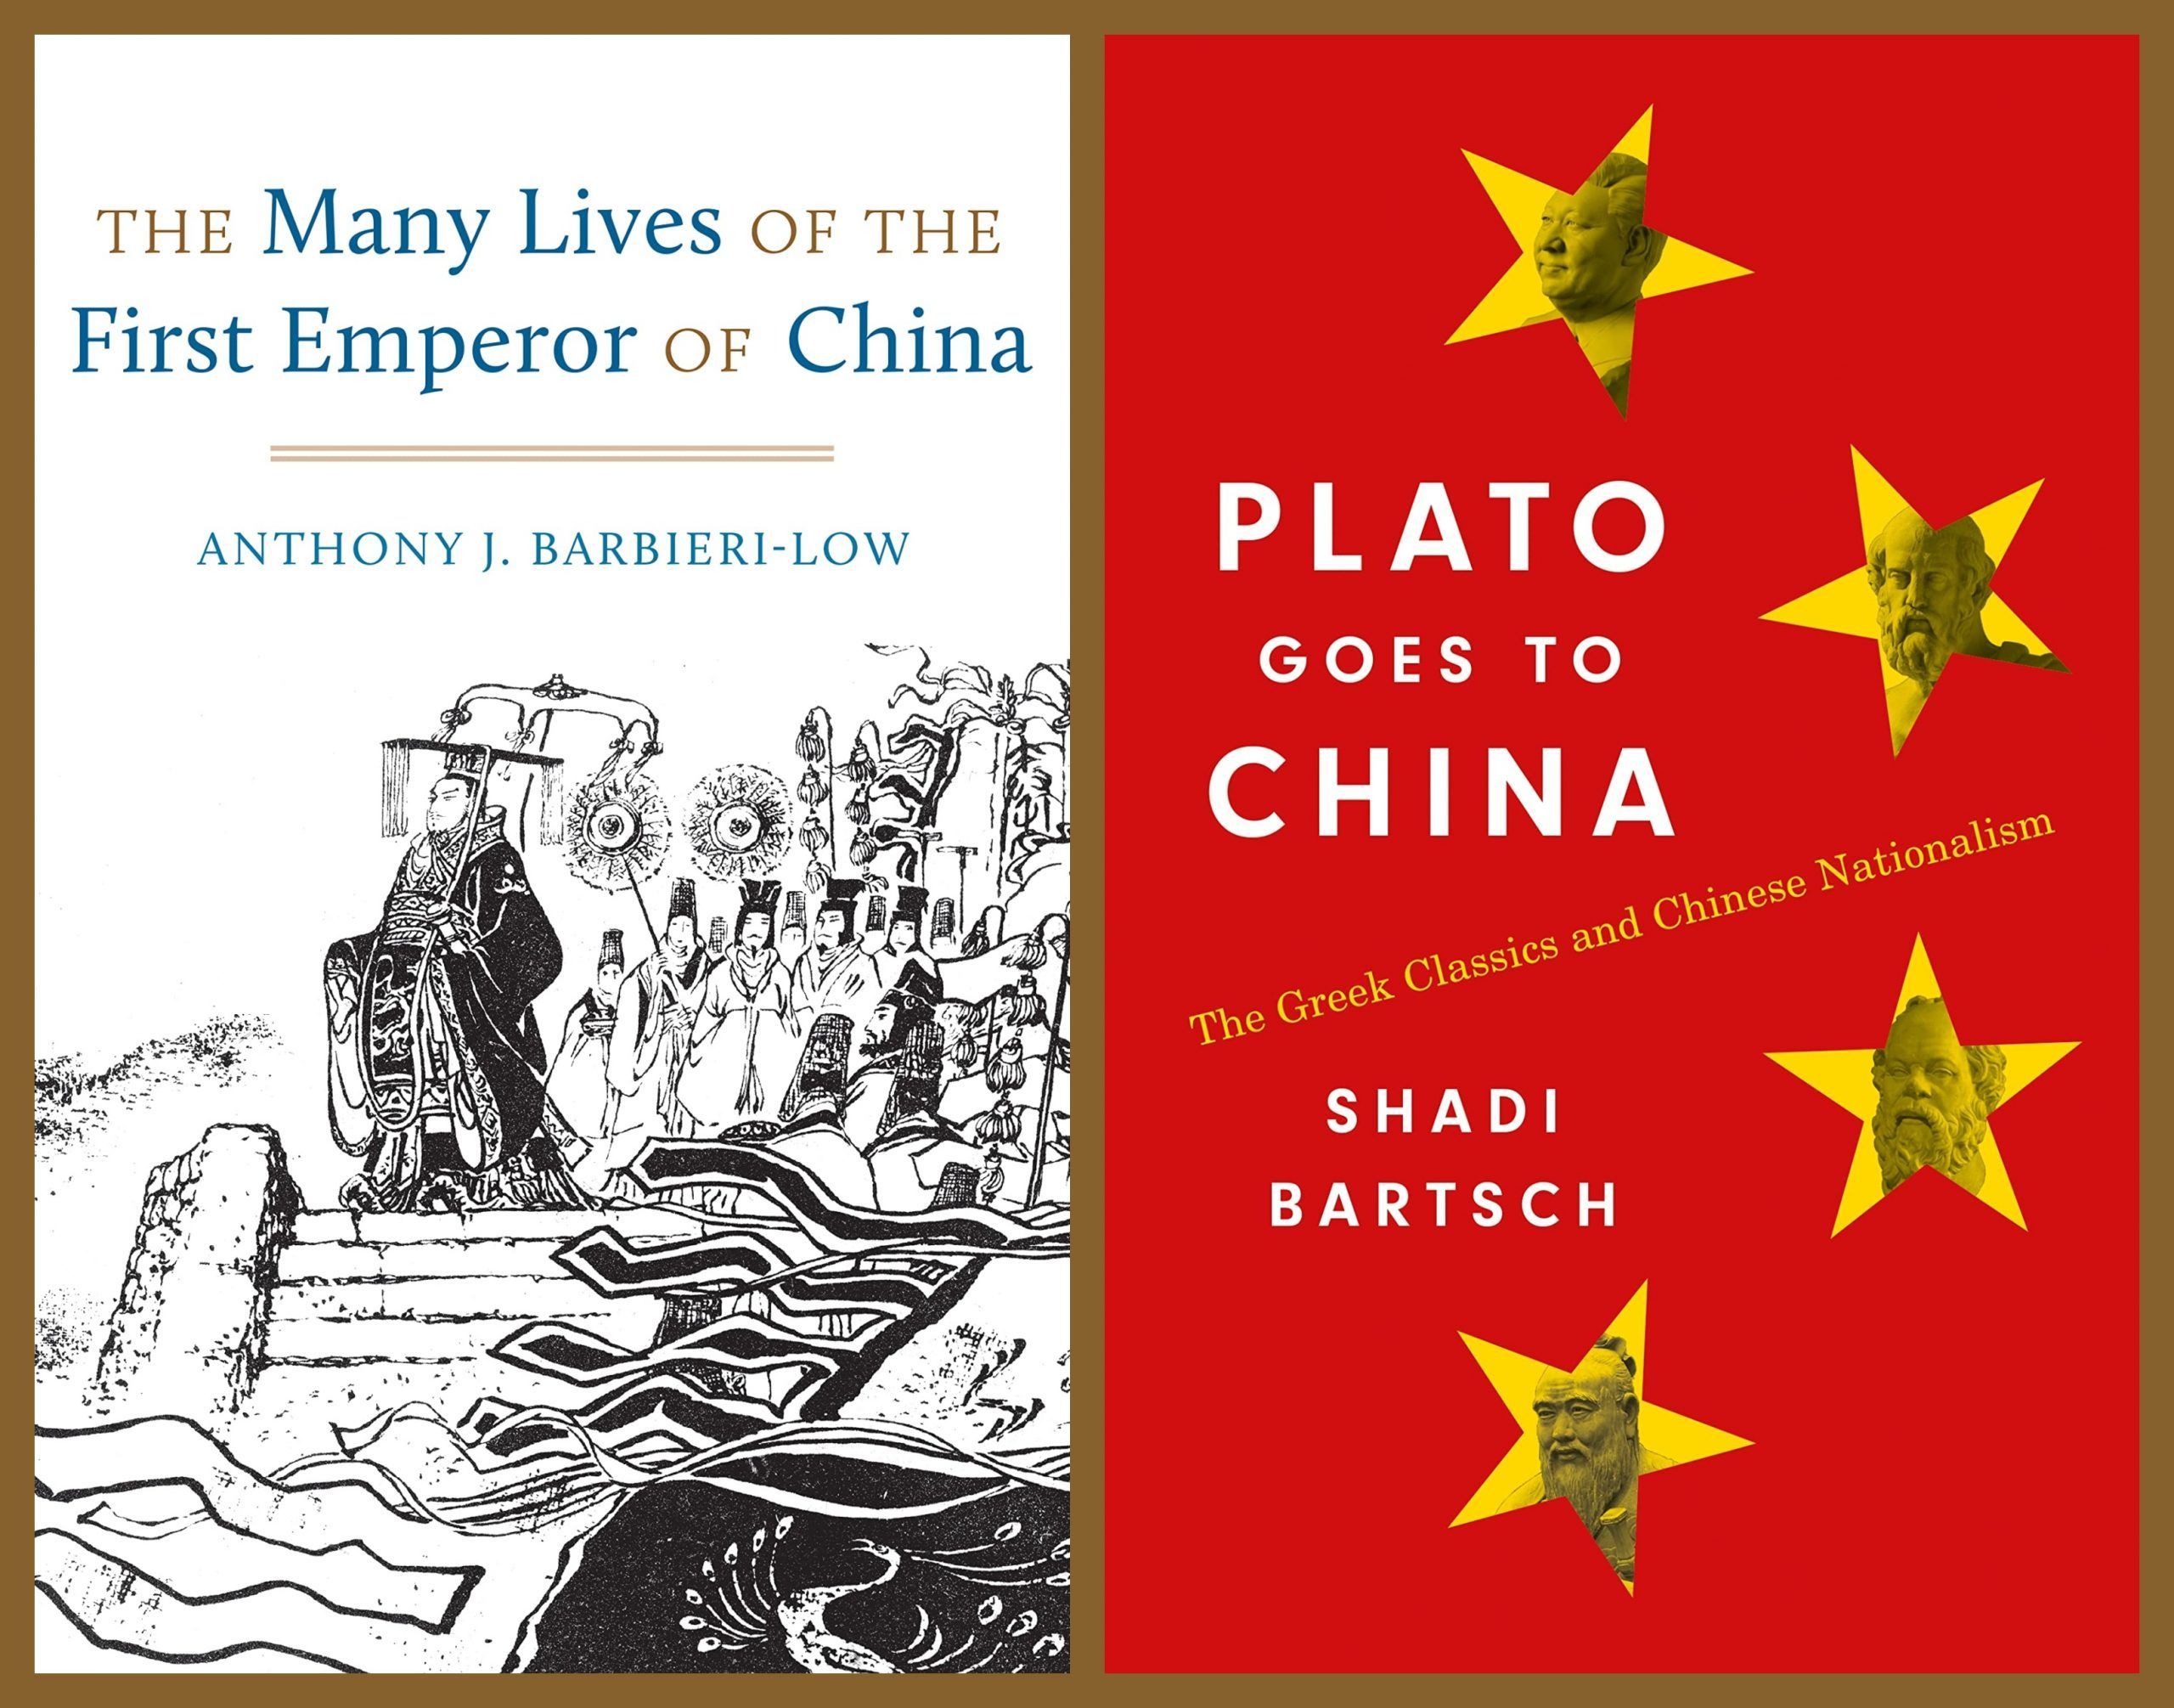 Ingesting Mercury and the Noble Lie: On Anthony Barbieri-Low’s “The Many Lives of the First Emperor of China” and Shadi Bartsch’s “Plato Goes to China”